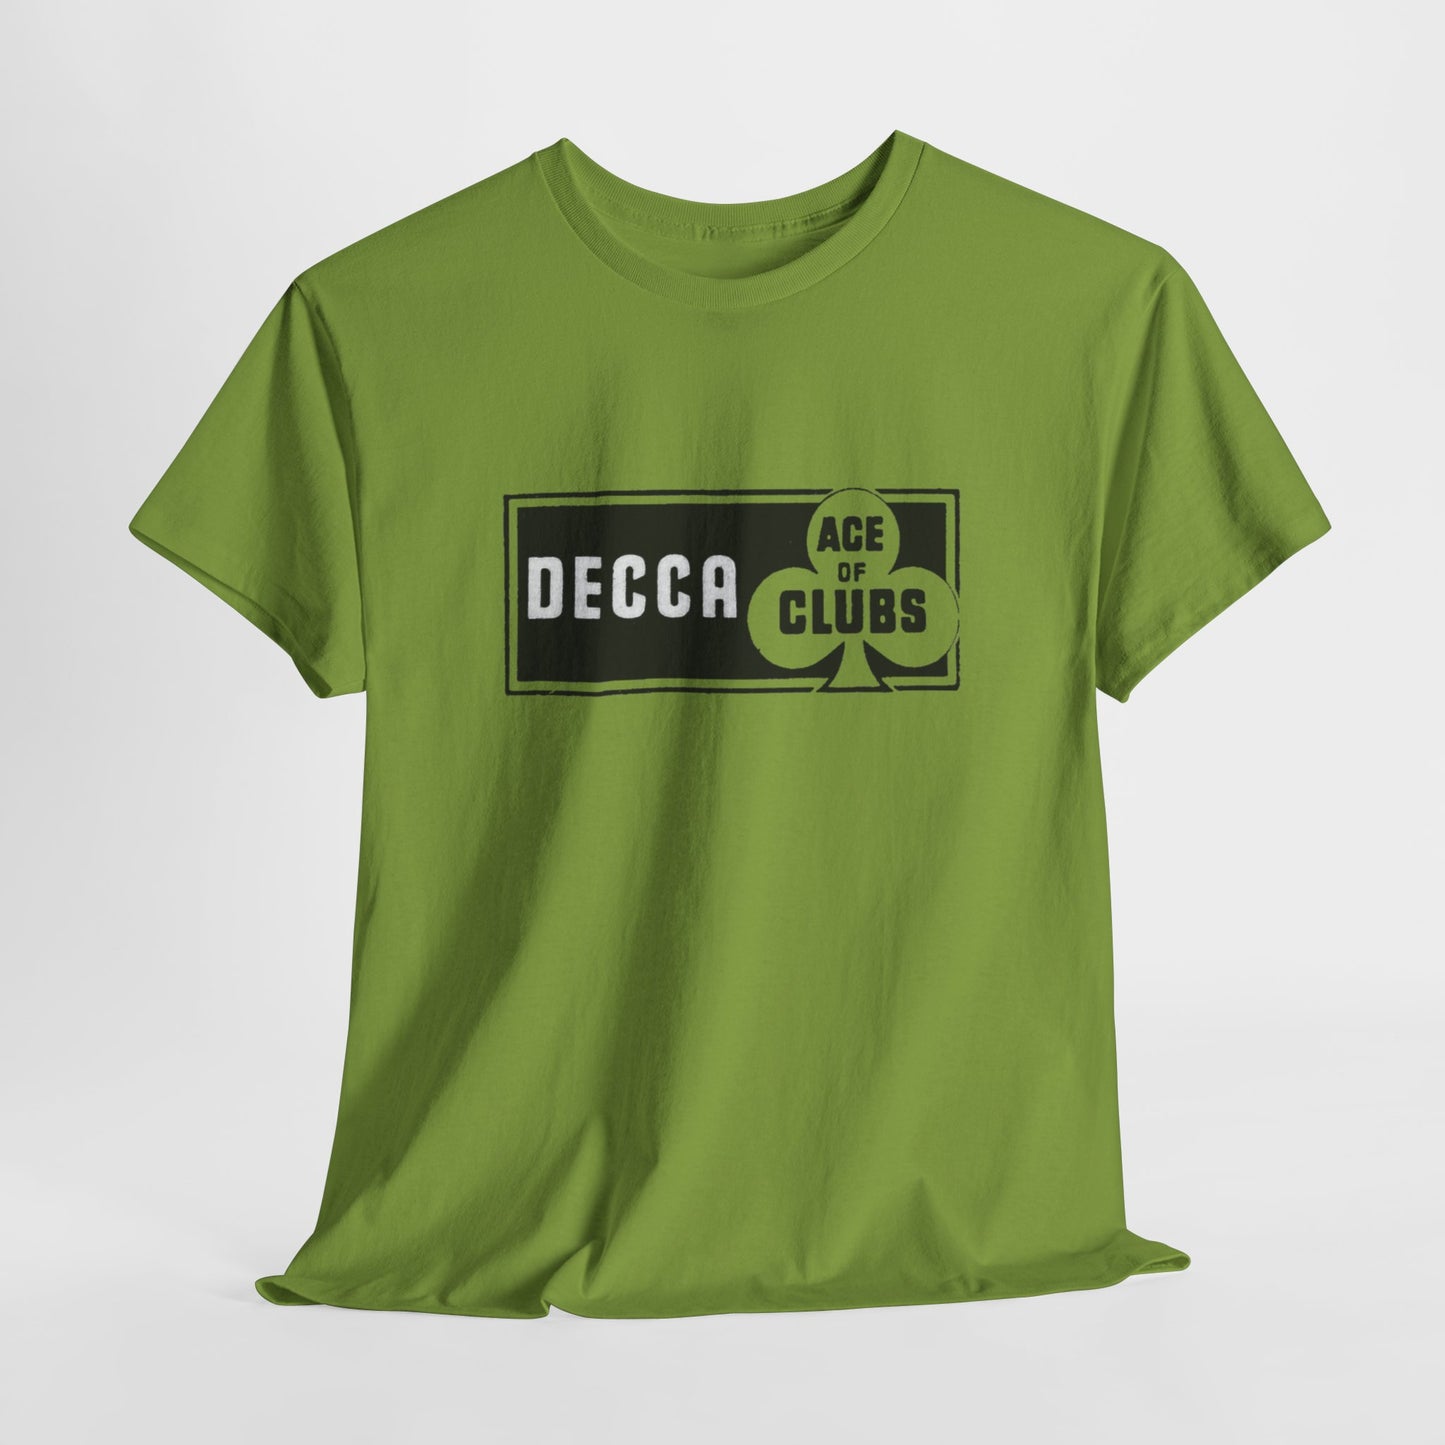 Music Label Tee #207: Ace Of Clubs Records